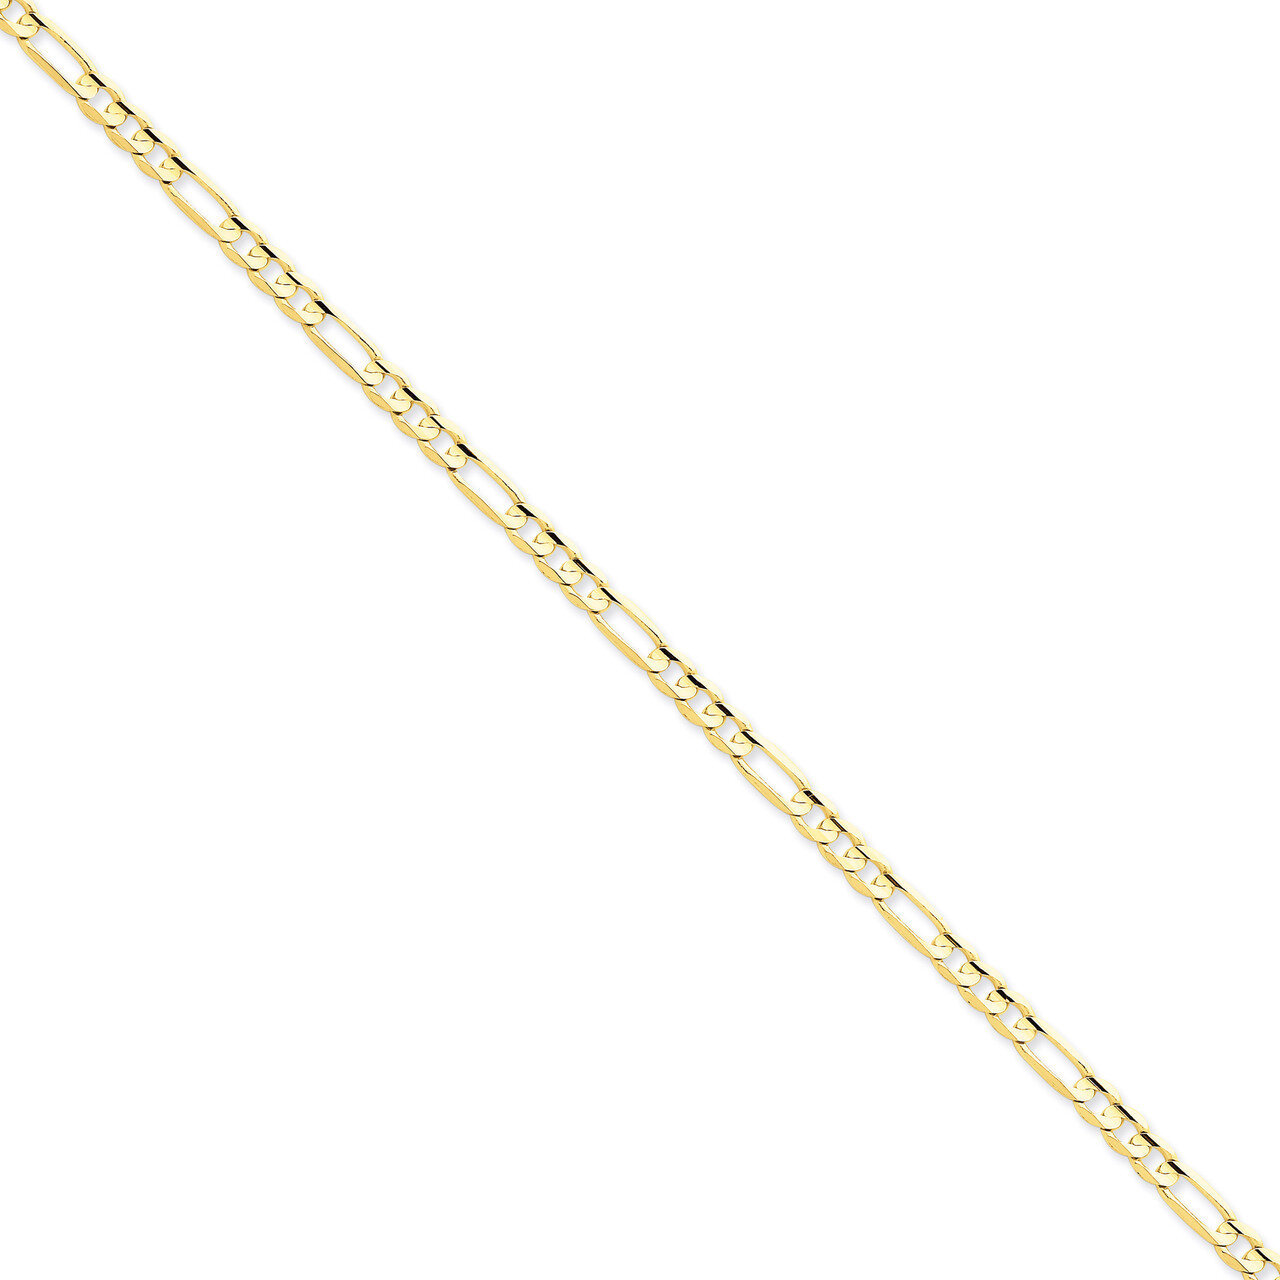 4.5mm Concave Open Figaro Chain 30 Inch 14k Gold LFG120-30